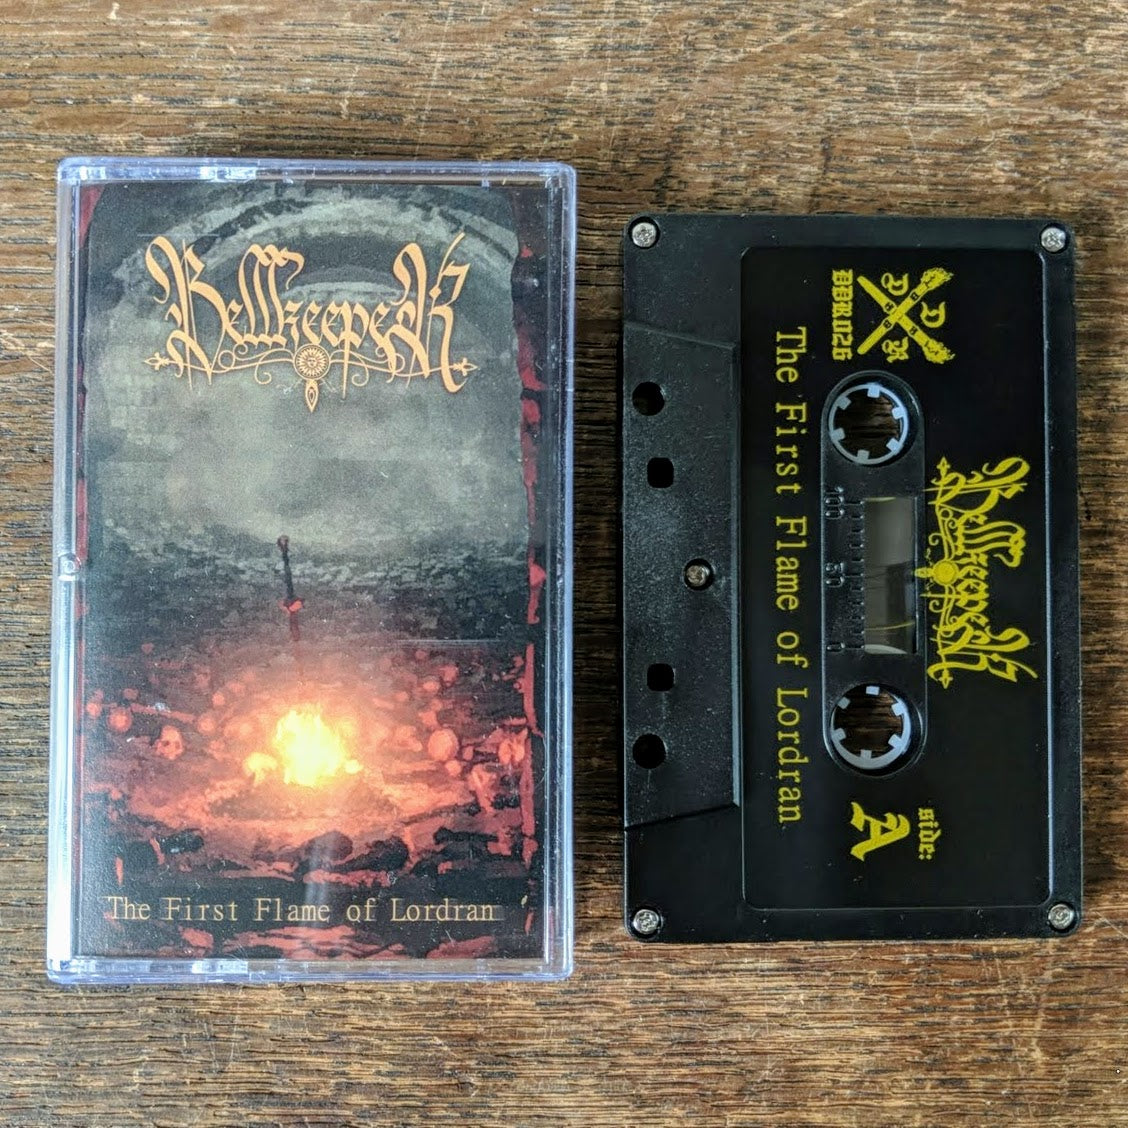 [SOLD OUT] BELLKEEPER "The First Flame of Lordran" Cassette Tape